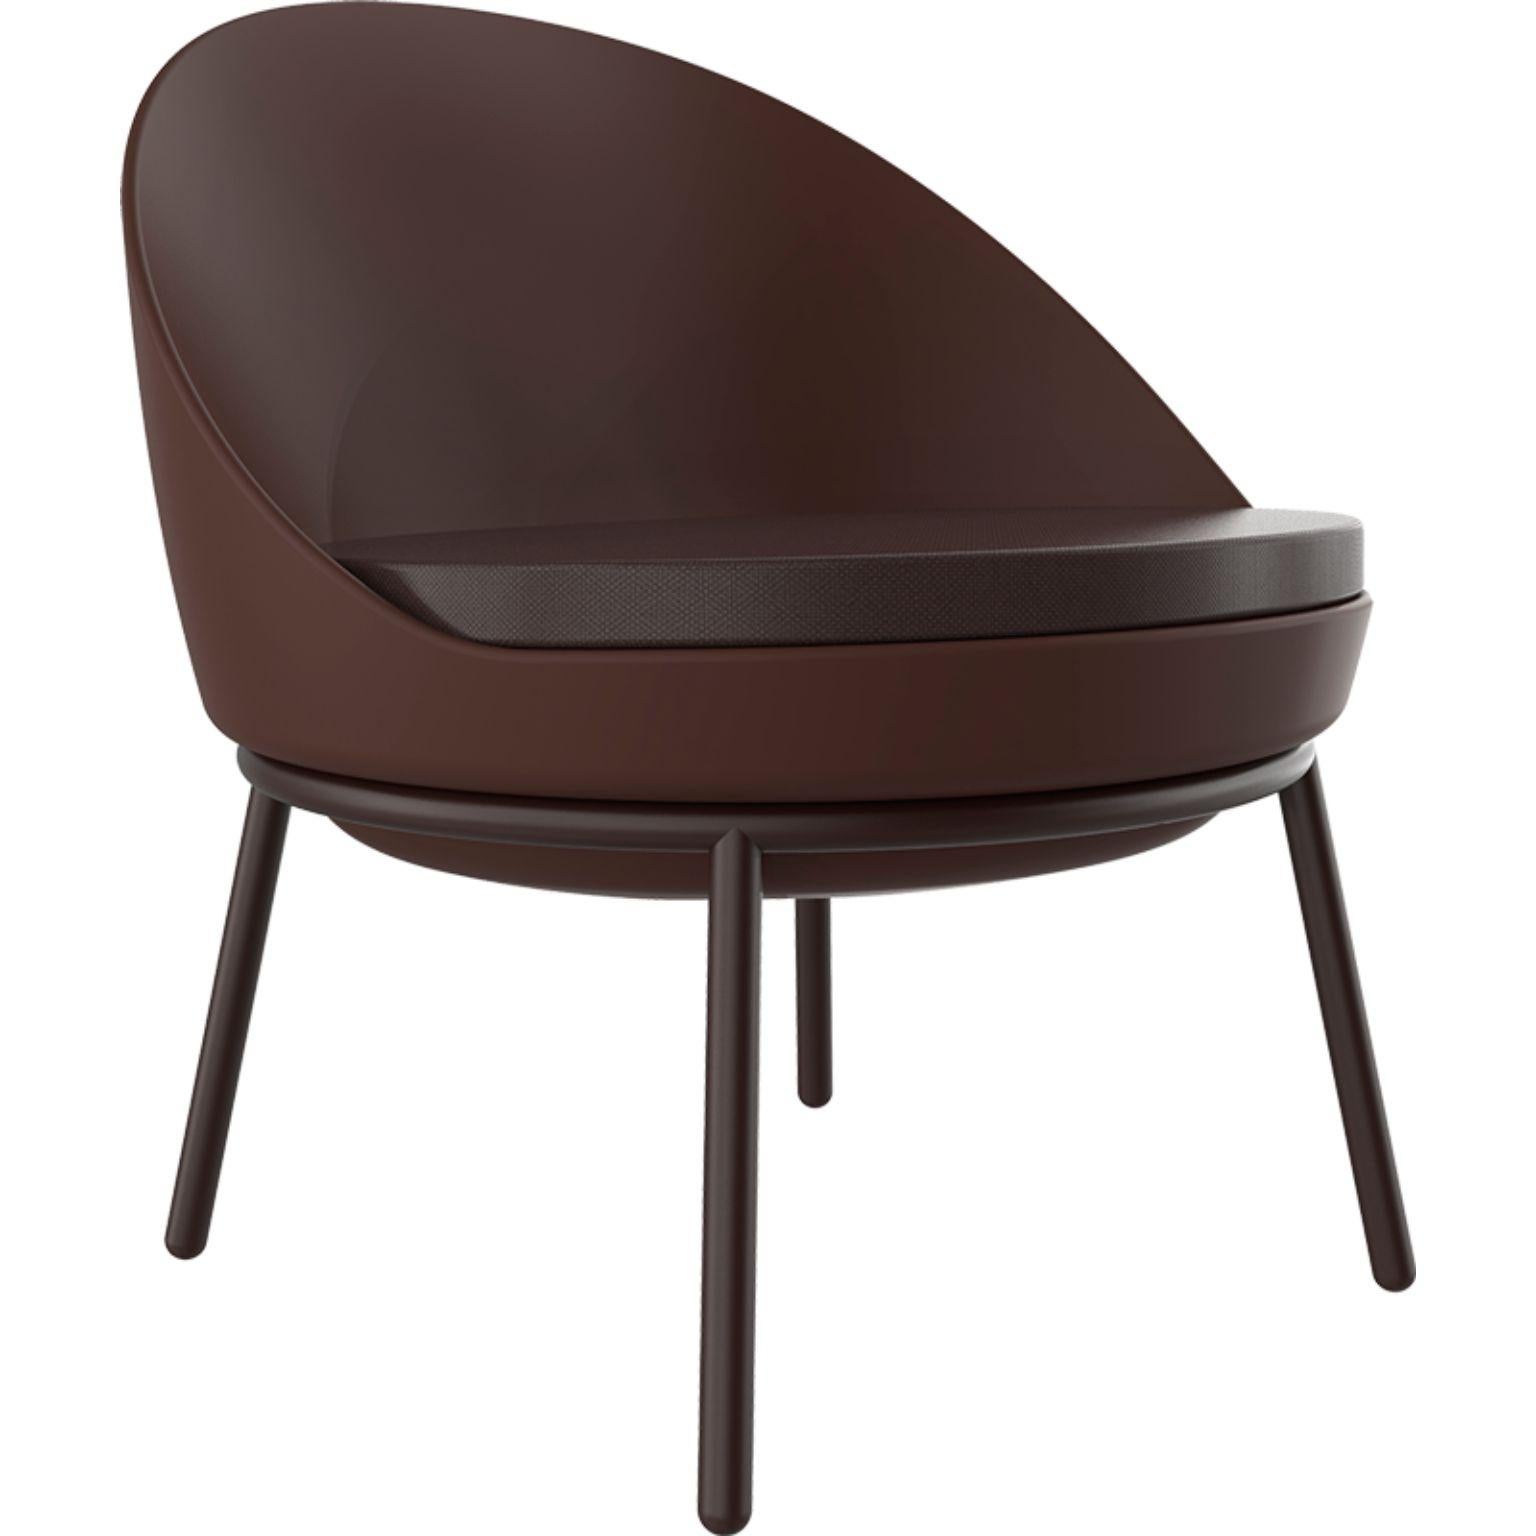 Lace chocolate lounge chair with cushion by MOWEE
Dimensions: D70 x W66 x H75.5 cm
Material: Polyethylene, Stainless Steel
Weight: 10.5 kg
Also Available in different colours and finishes. 

Lace is a collection of furniture made by